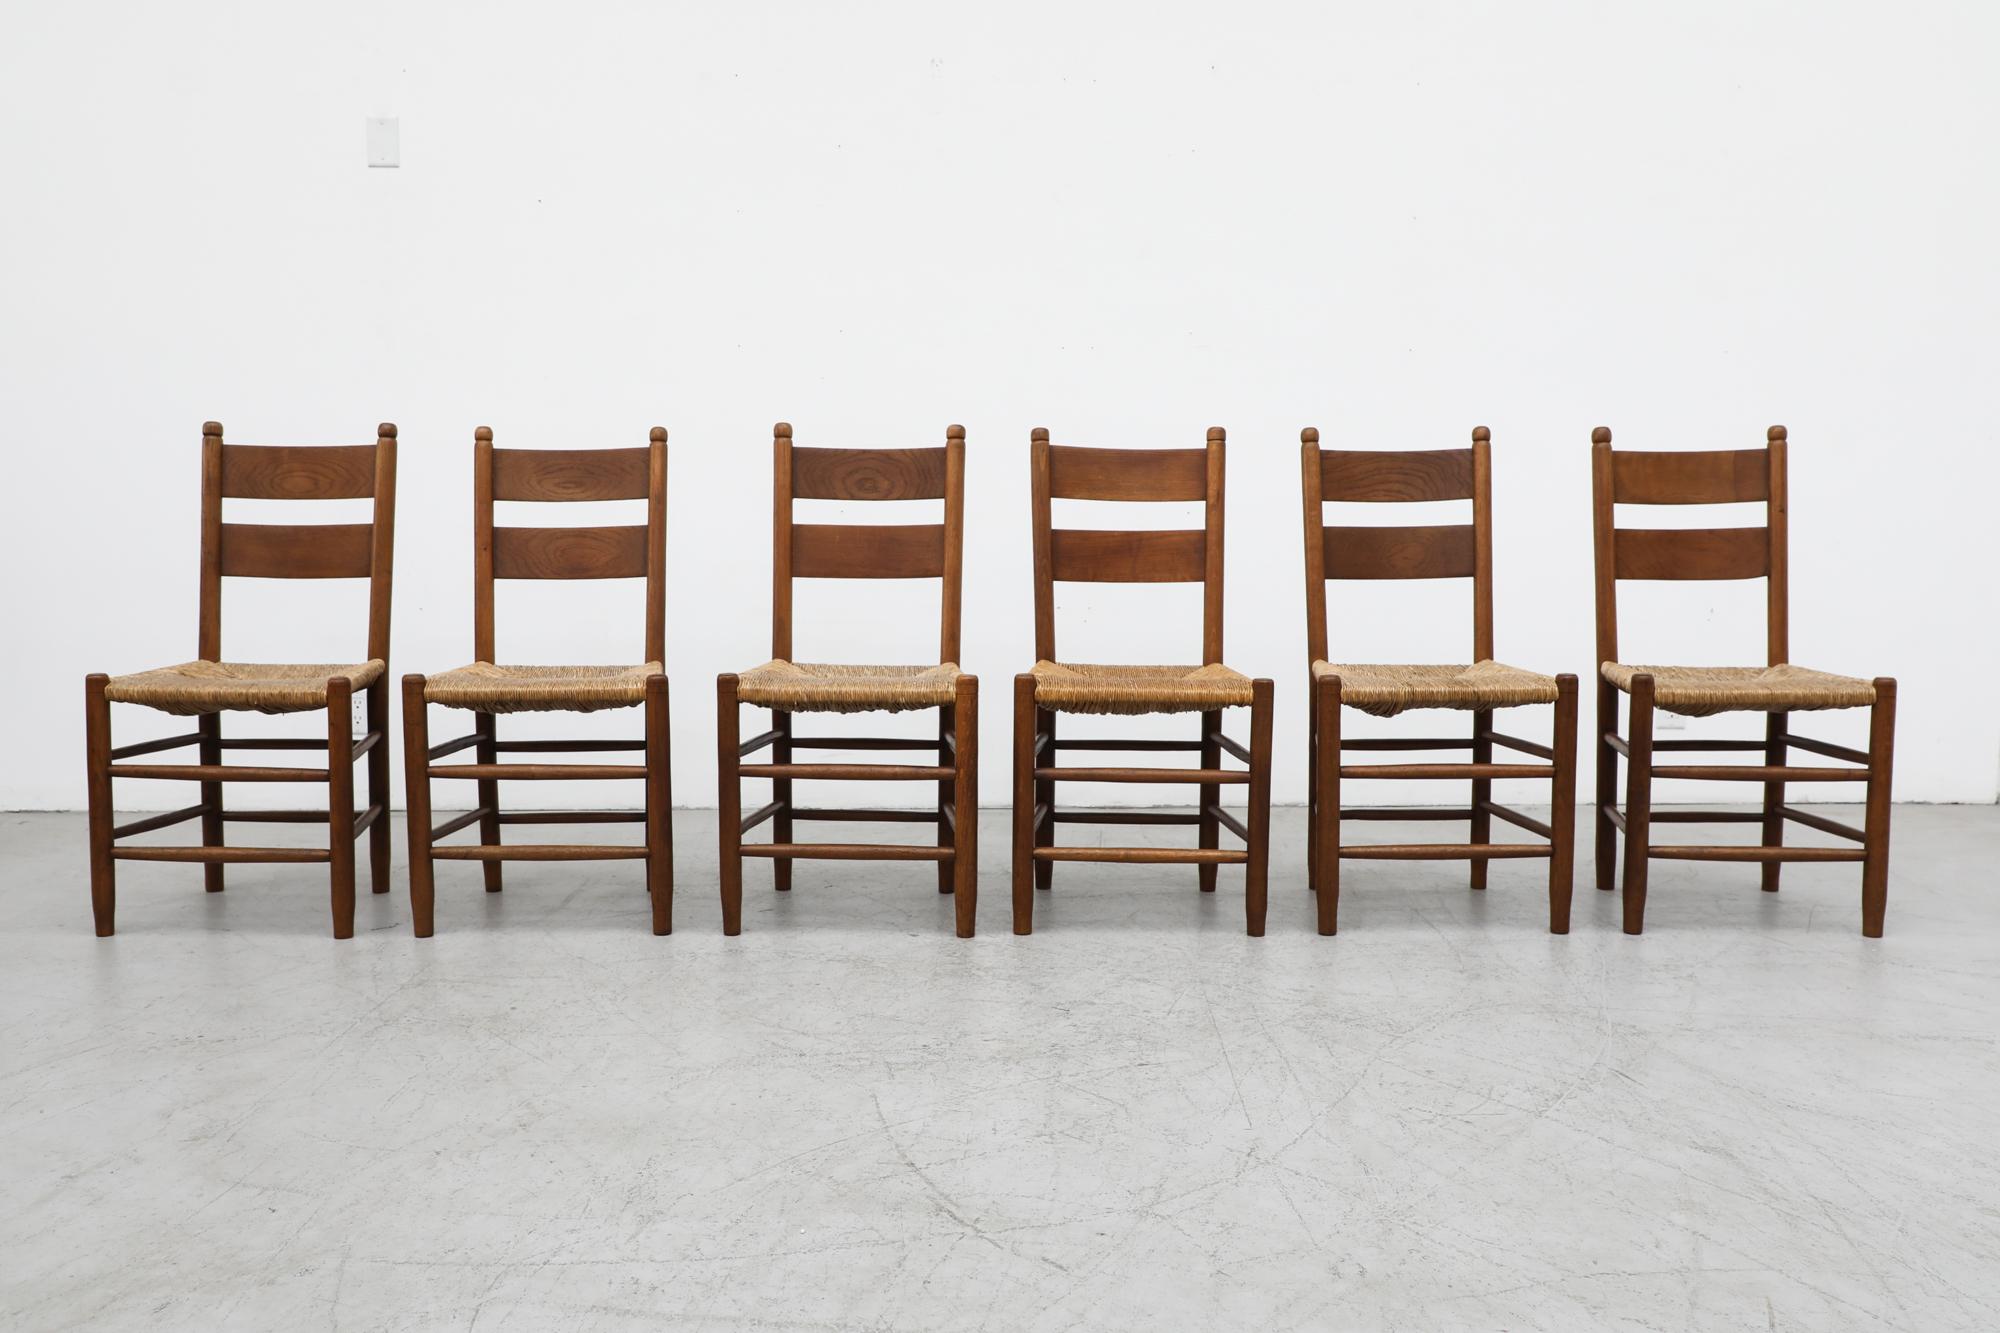 Quaker Style ladder back dining chairs in the style of Charlotte Perriand with dark stained oak frames and rush seats In original condition, with visible patina and heavy wear, including some breakage and loss to rush seats. Wear is consistent with